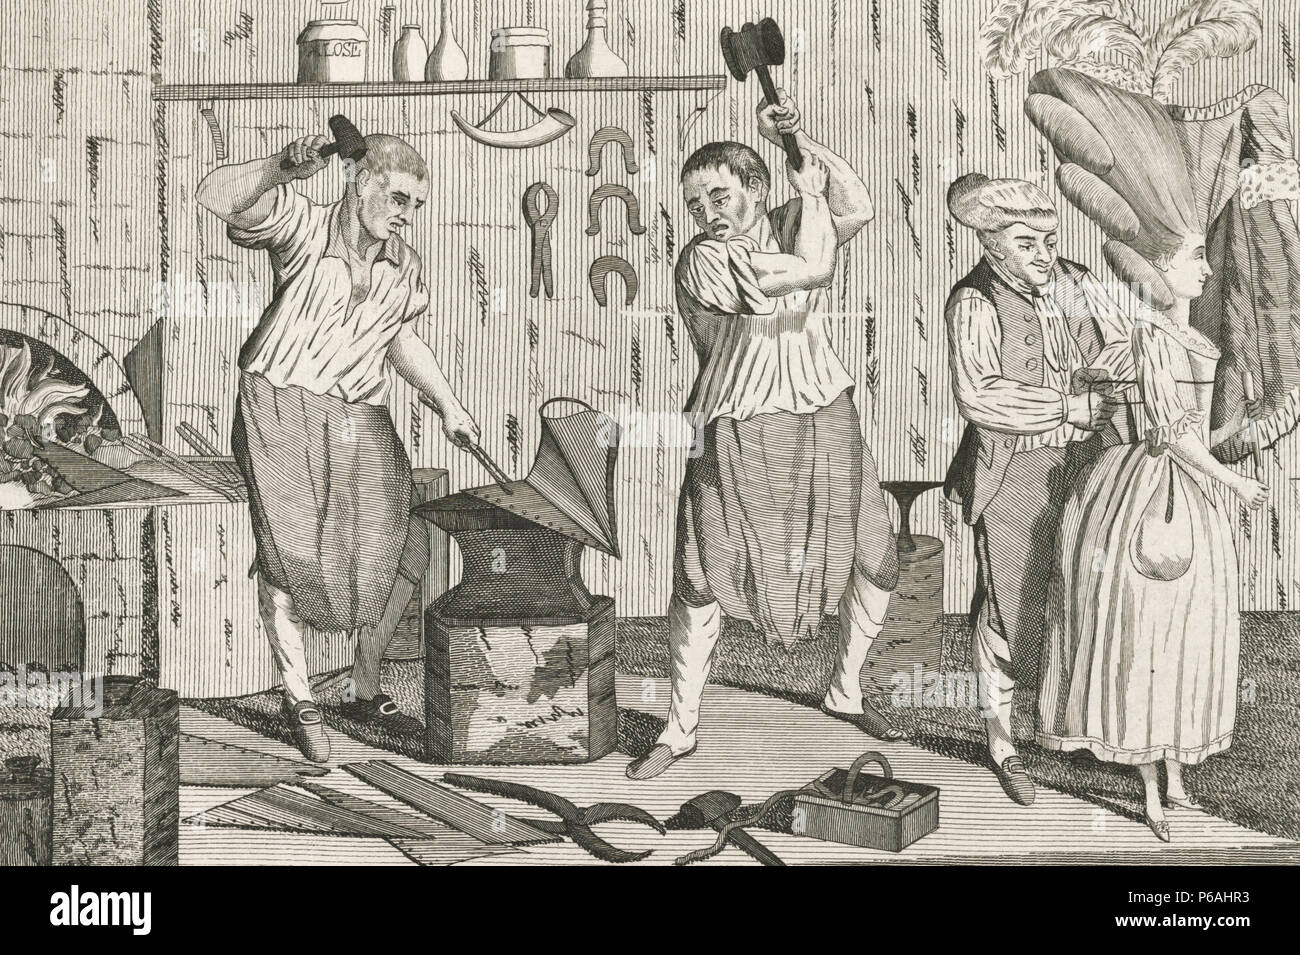 Bath stays or The lady's steel shapes -  'The interior of a blacksmith's smithy. On the anvil is a portion of a pair of stays, at which two smiths strike with hammers, one (left) holding the stays by pincers...' June 4, 1777. Stock Photo